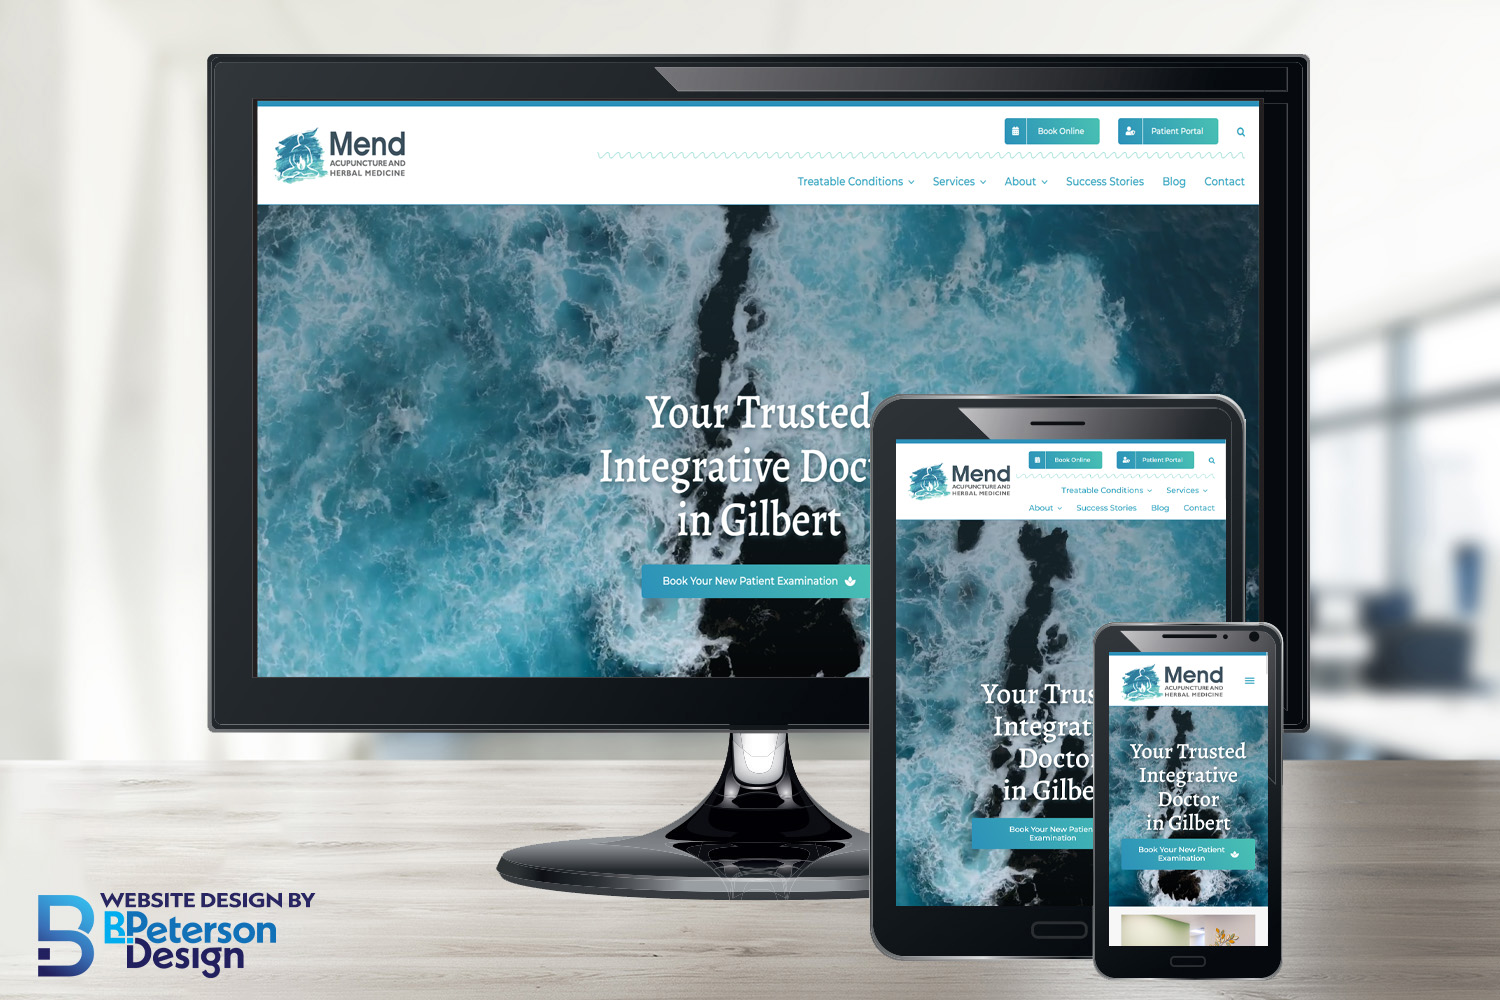 Website redesign for Mend Acupuncture shown on different devices